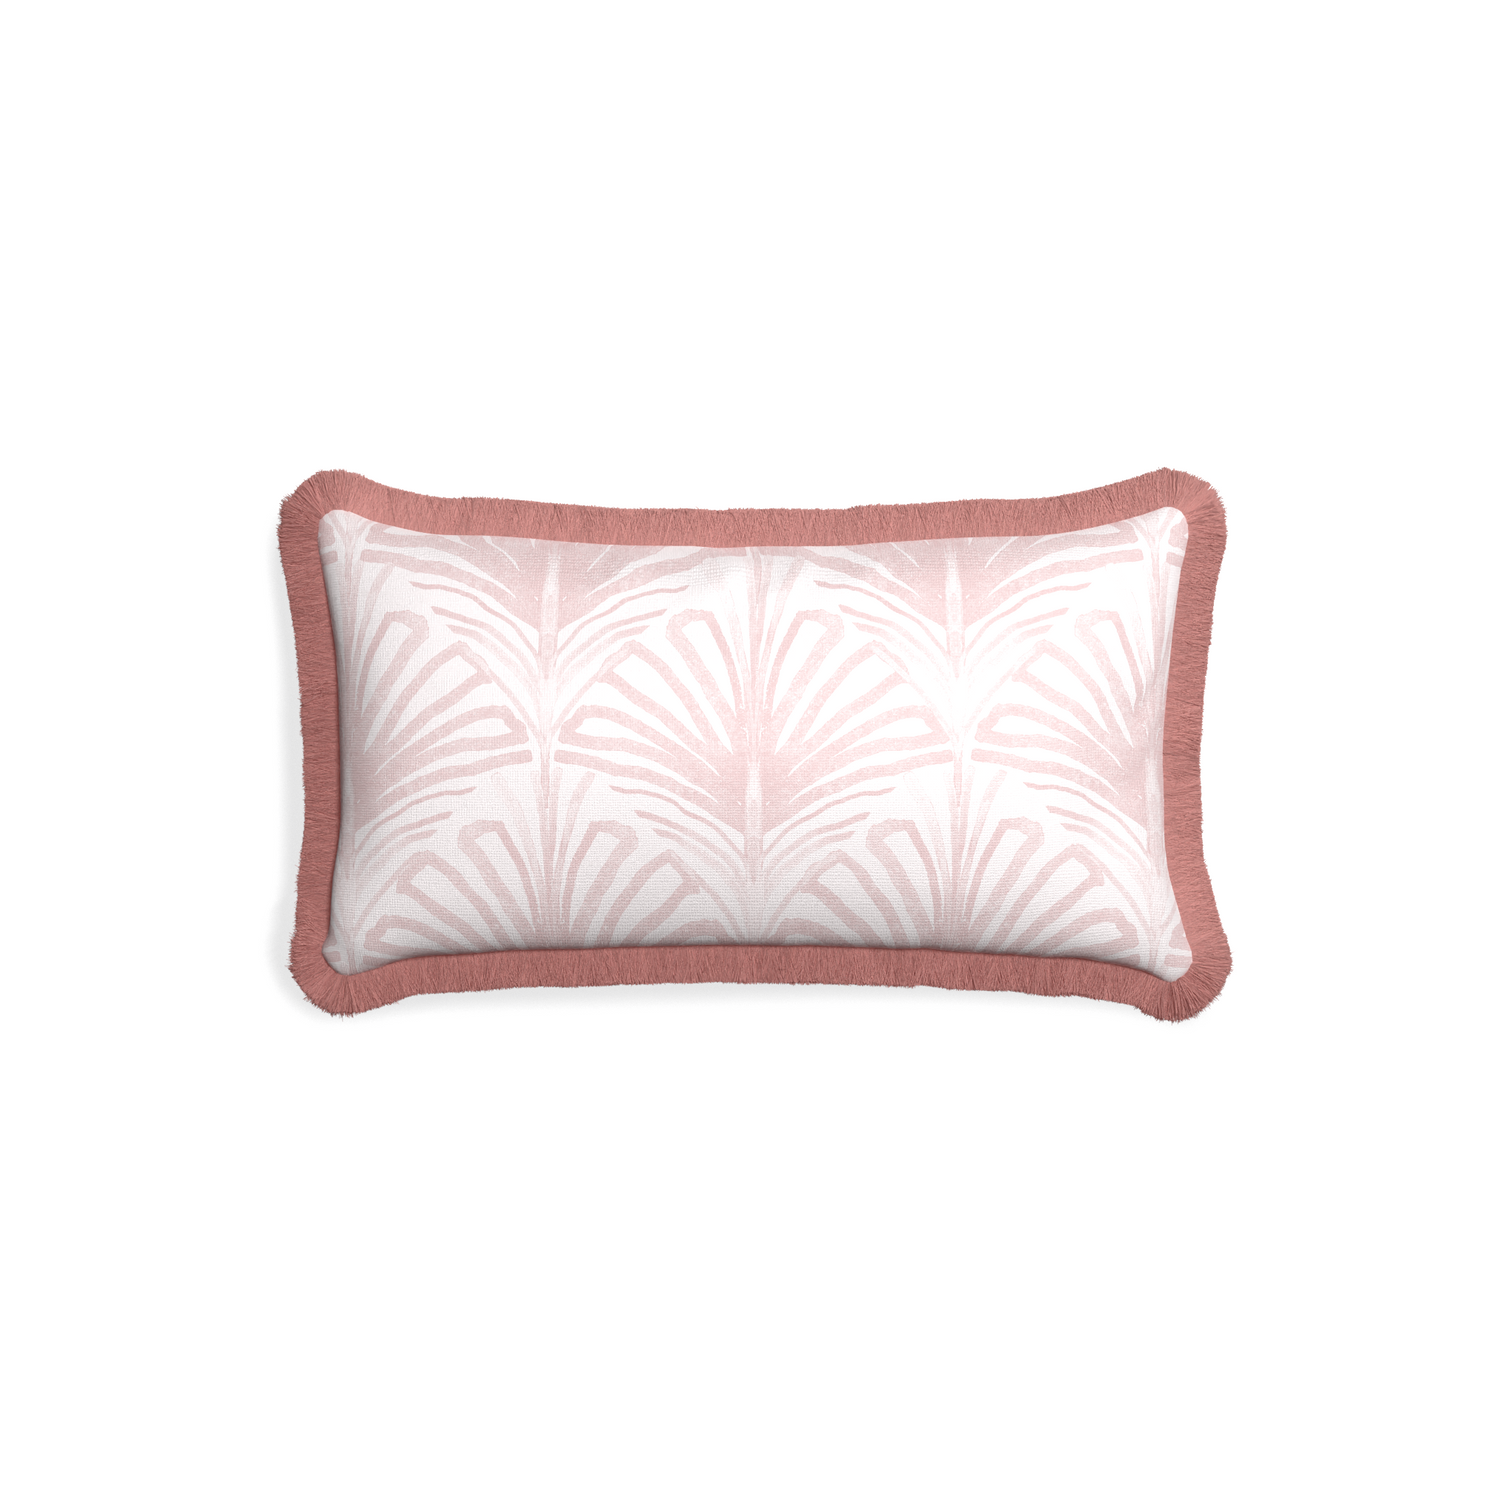 Petite-lumbar suzy rose custom rose pink palmpillow with d fringe on white background